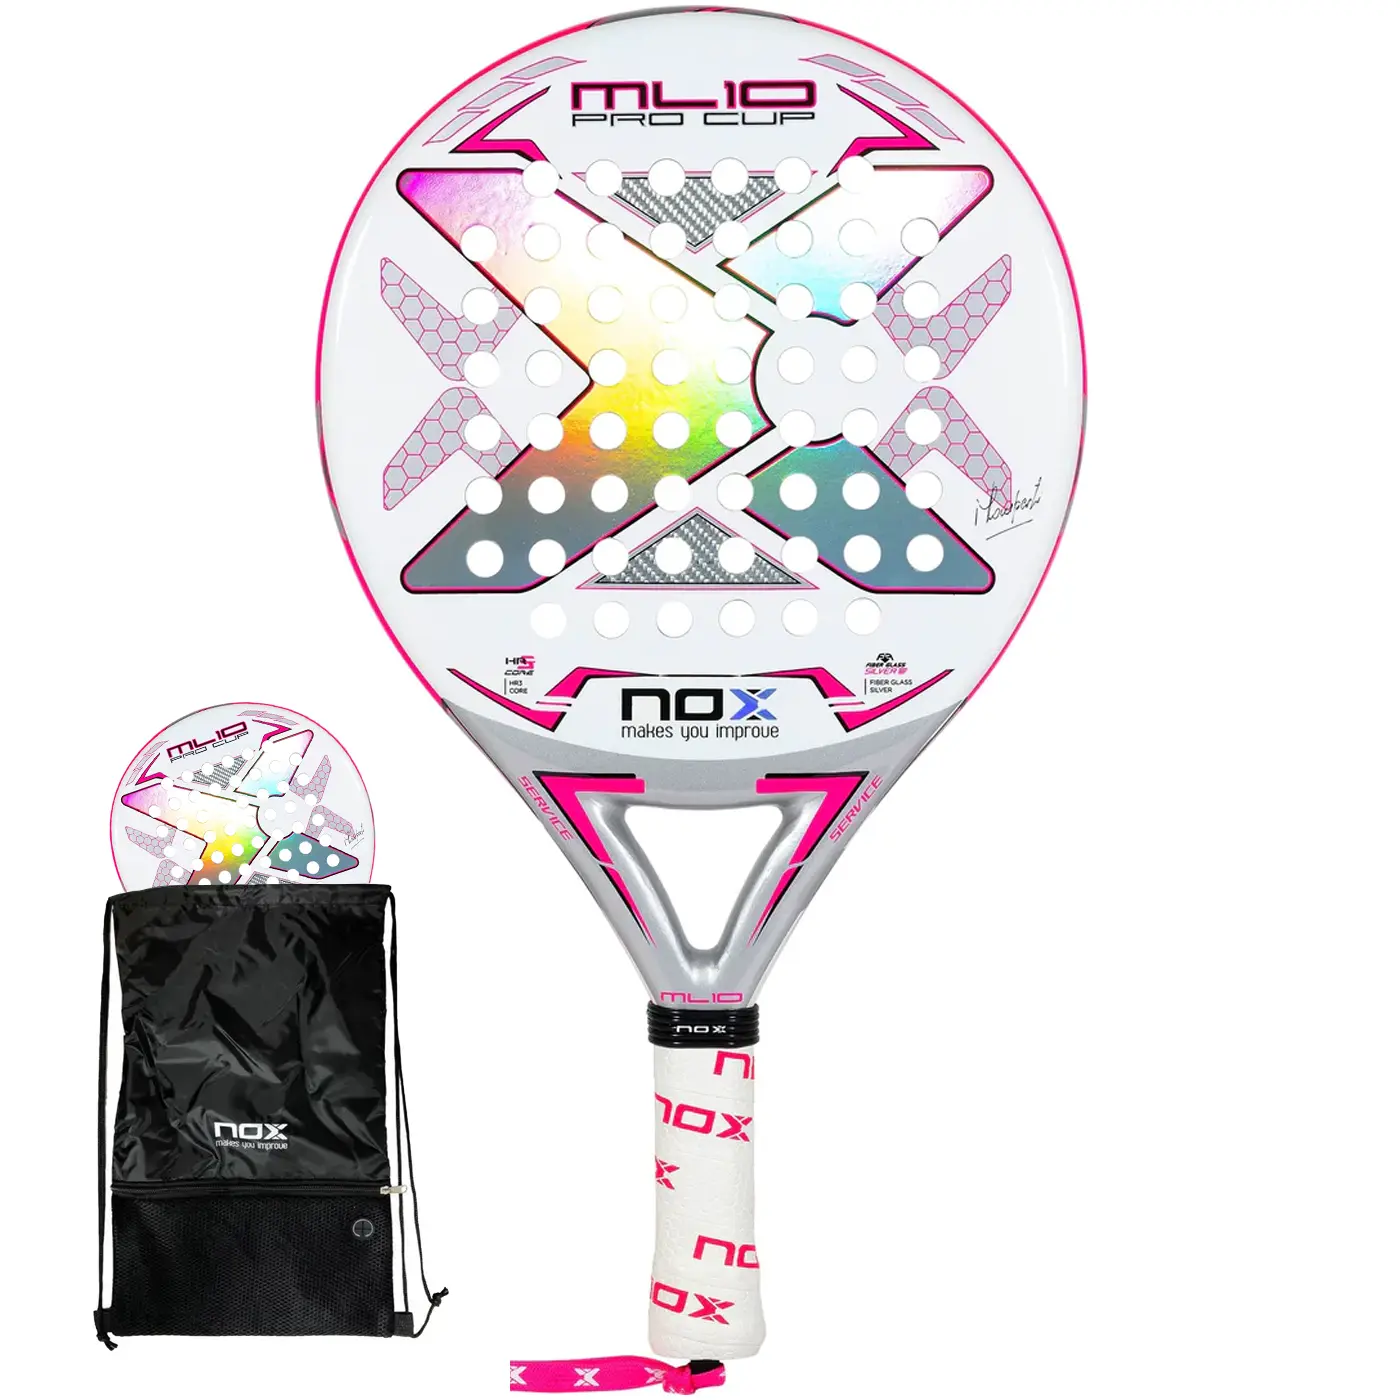 NOX ML10 PRO CUP Silver Padel Racket, racket with cover bag Image 1